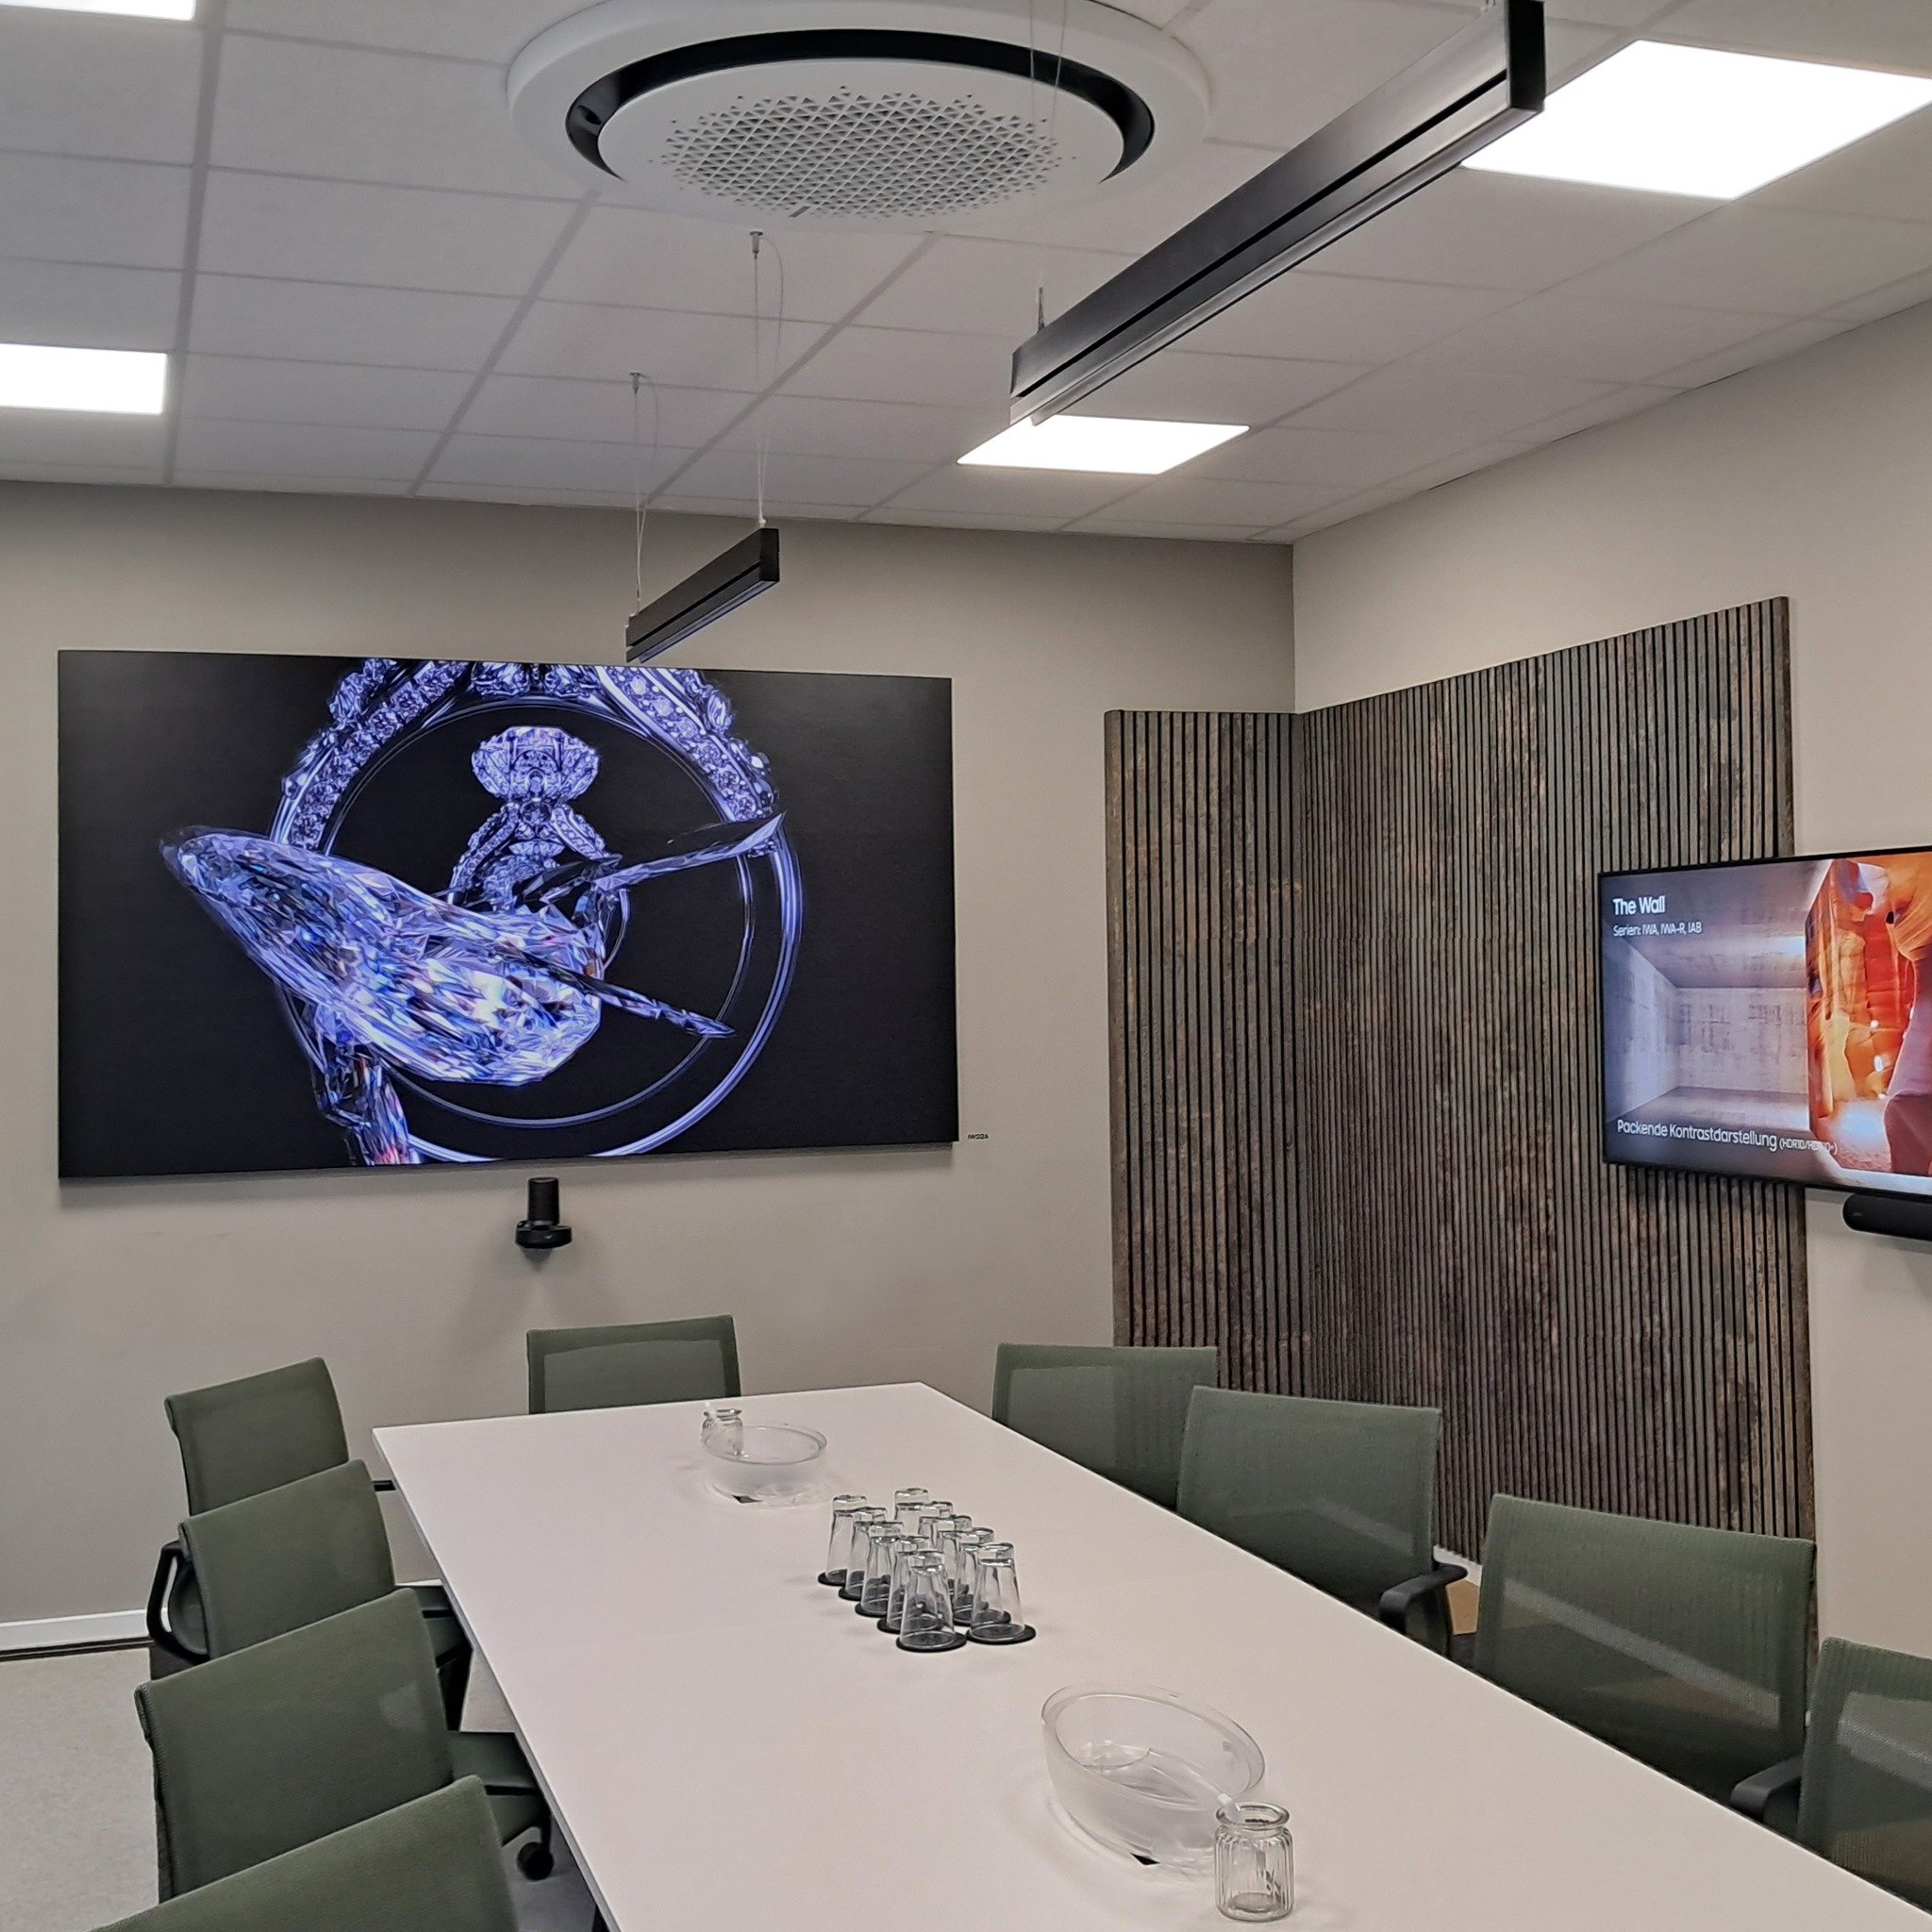 KSCAPE &amp; Samsung collaborate to create meeting room harmony! 

@samsung, a global leader in technology display technology, has collaborated with @k_scape_merging_senses to transform the meeting room experience at the Samsung Experience Centre in 